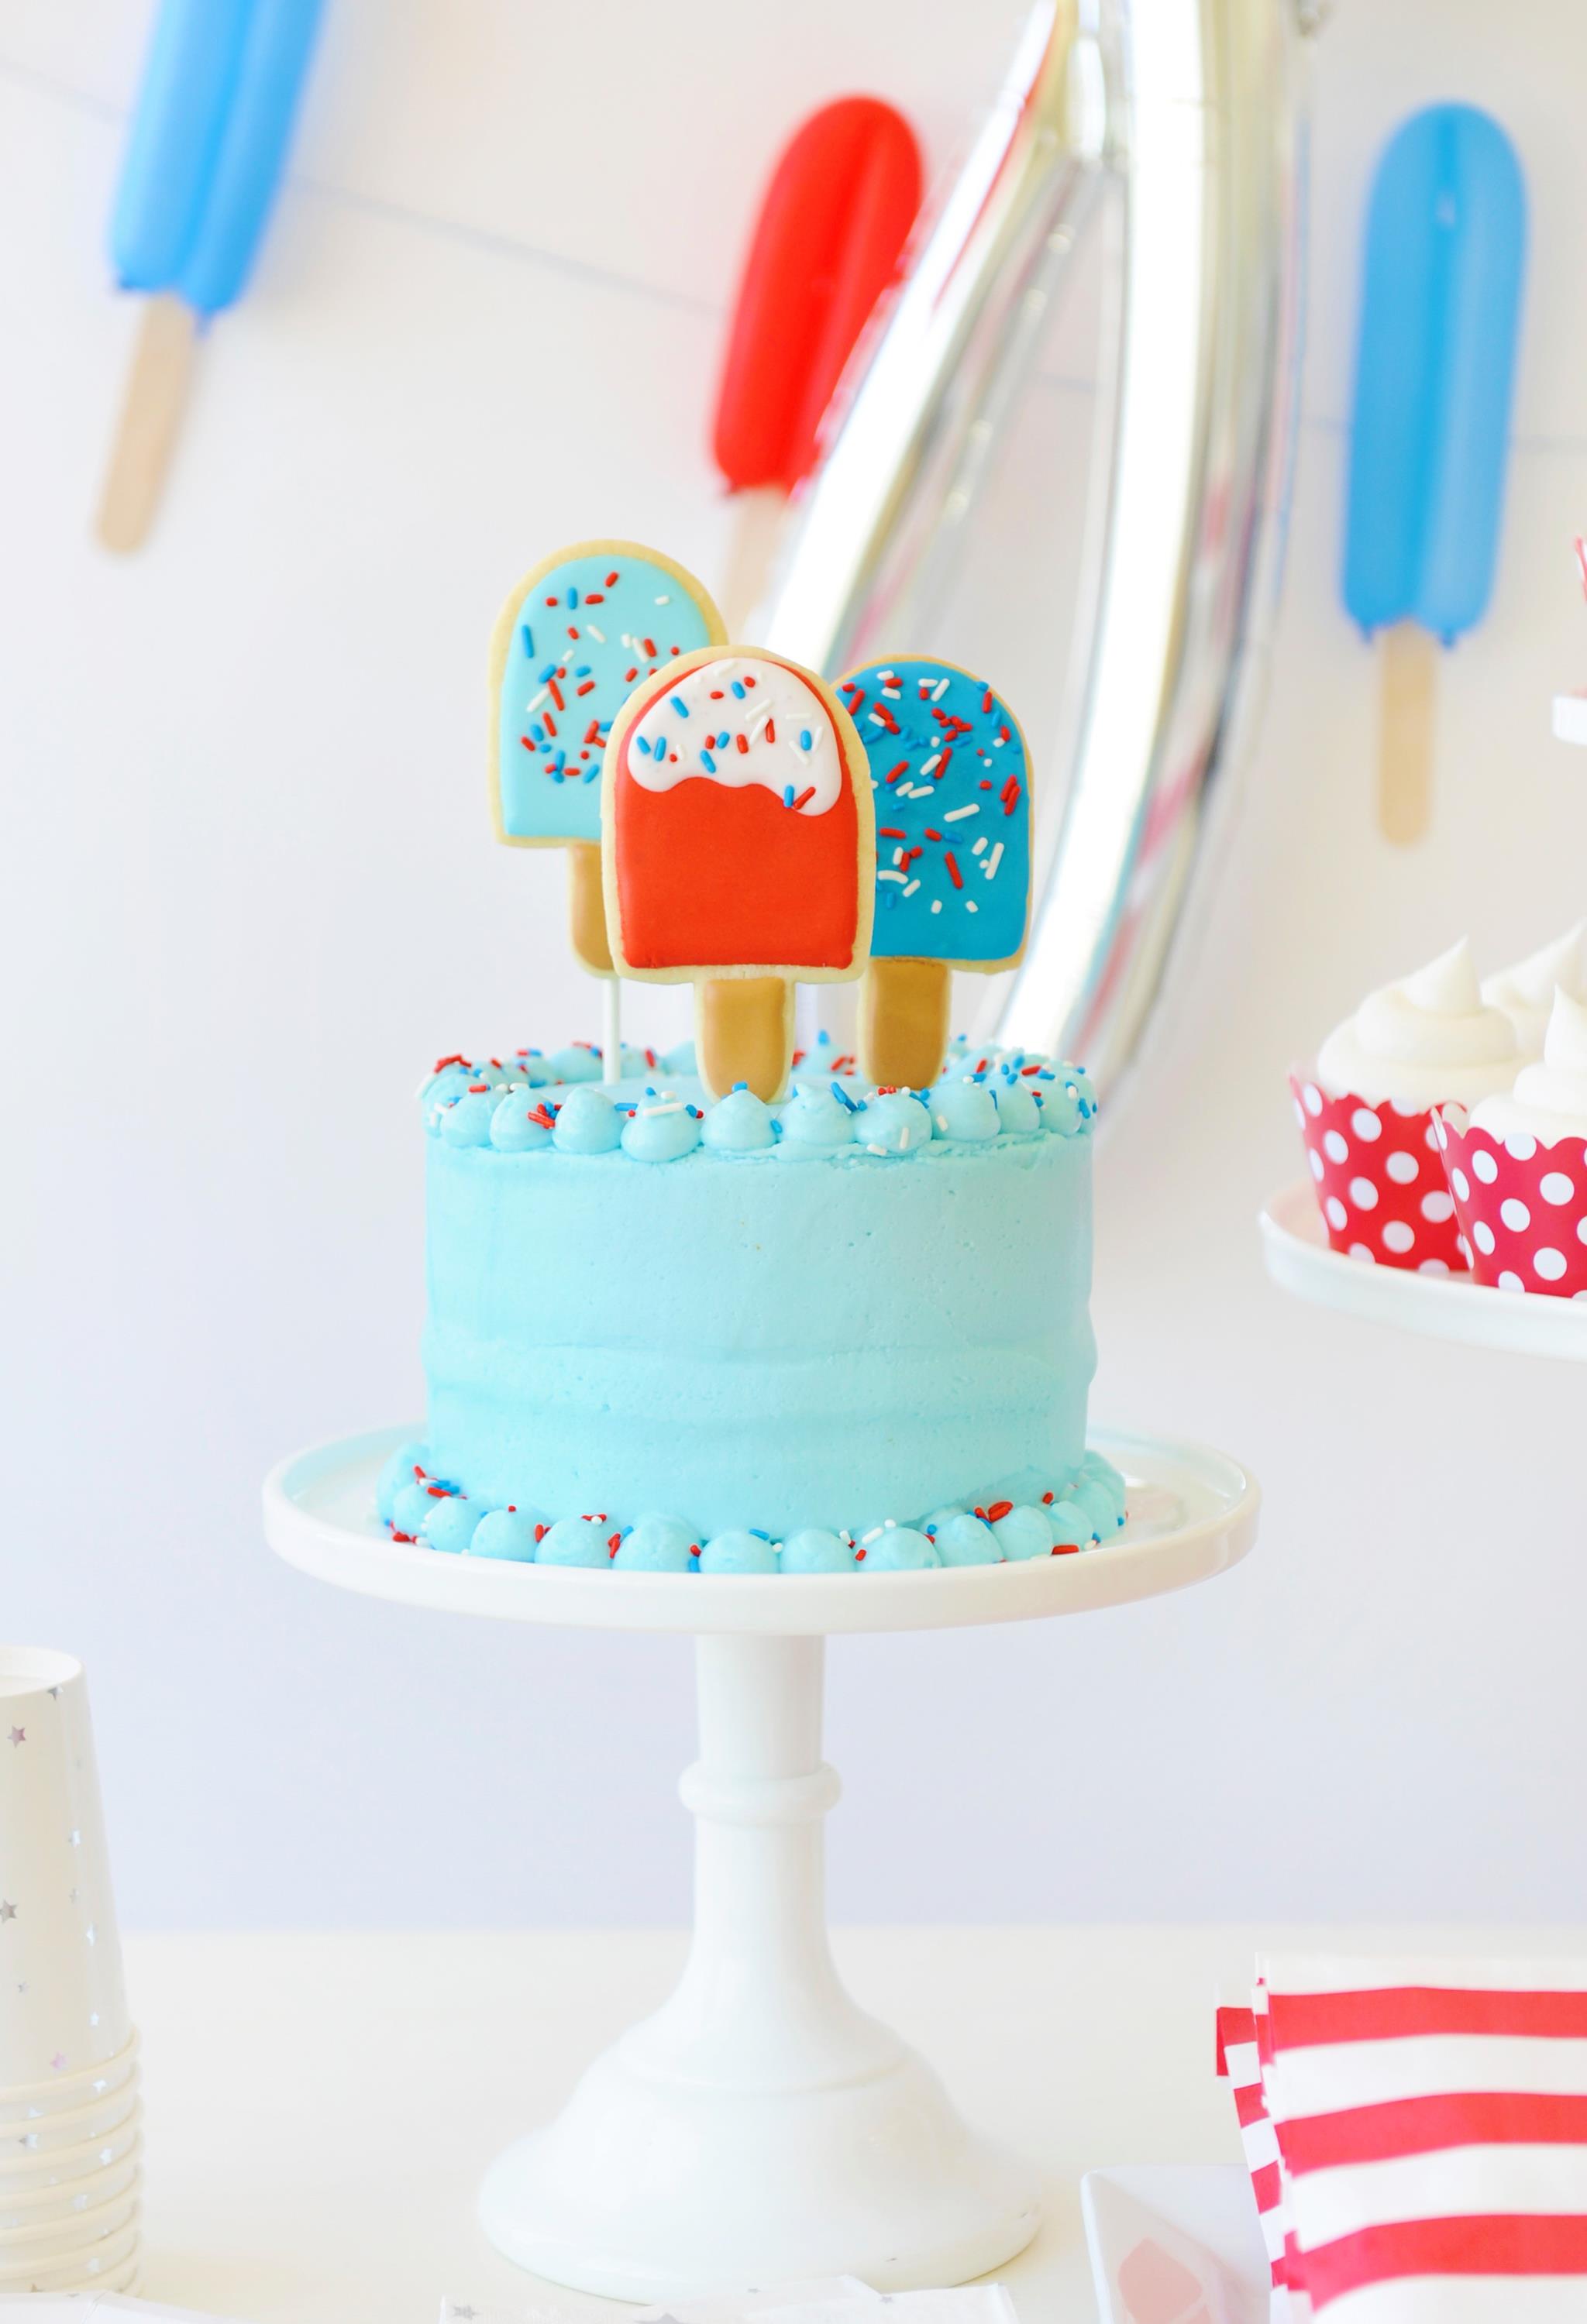 Popsicle Cake at Popsicle Party